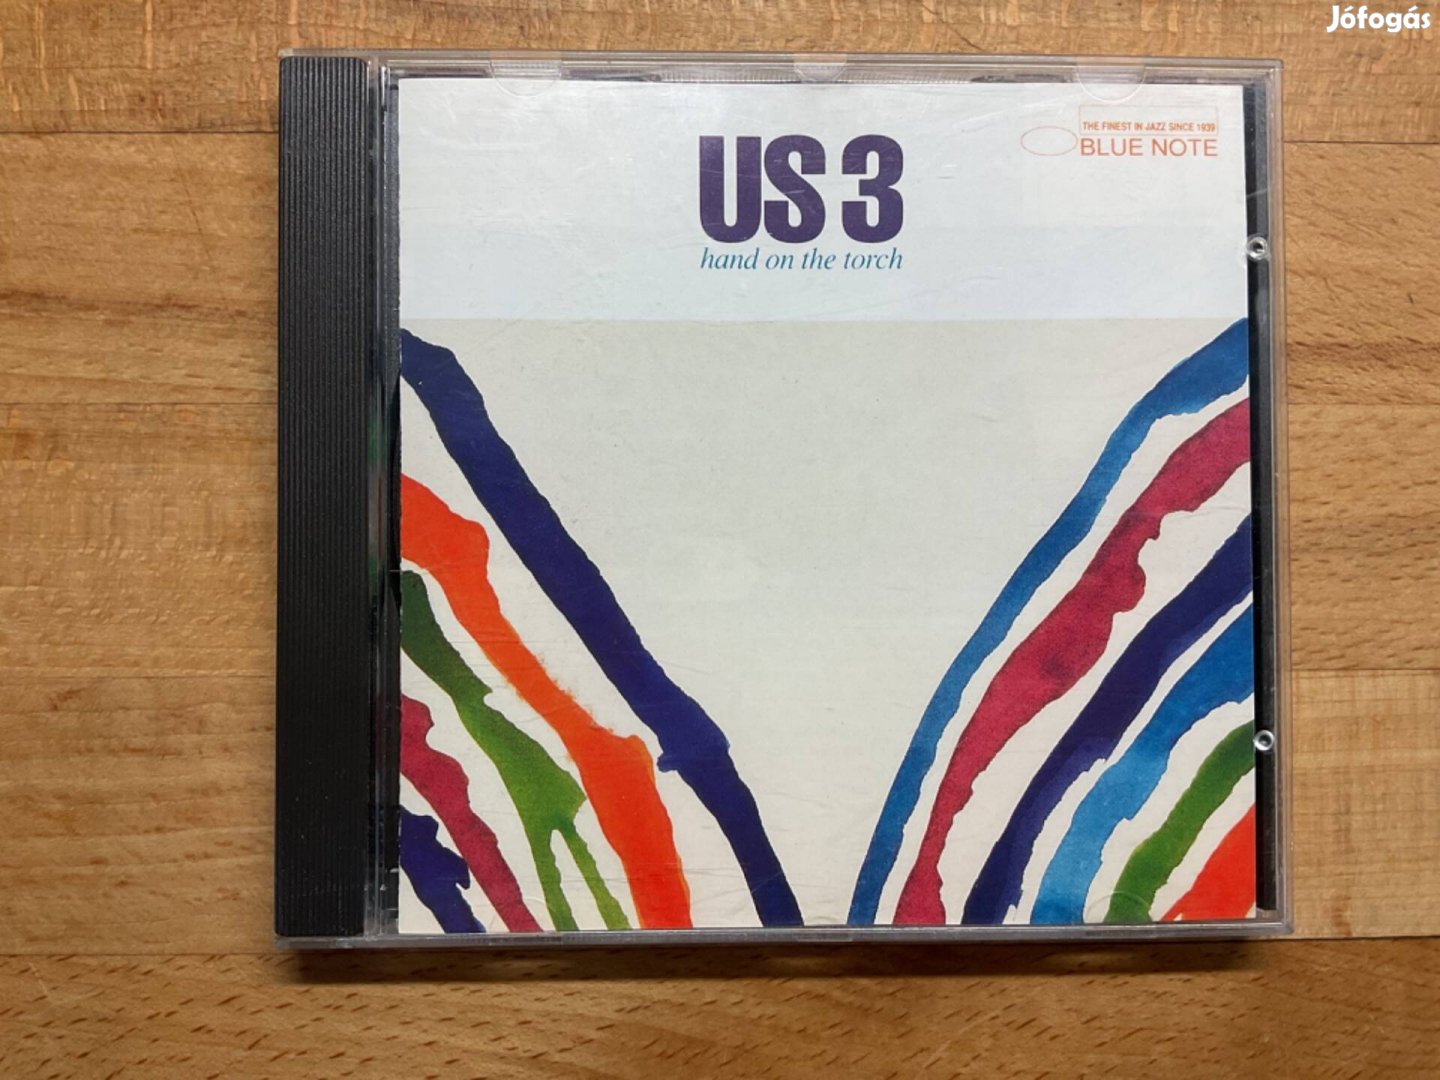 Us 3 - Hand on The Torch, cd lemez